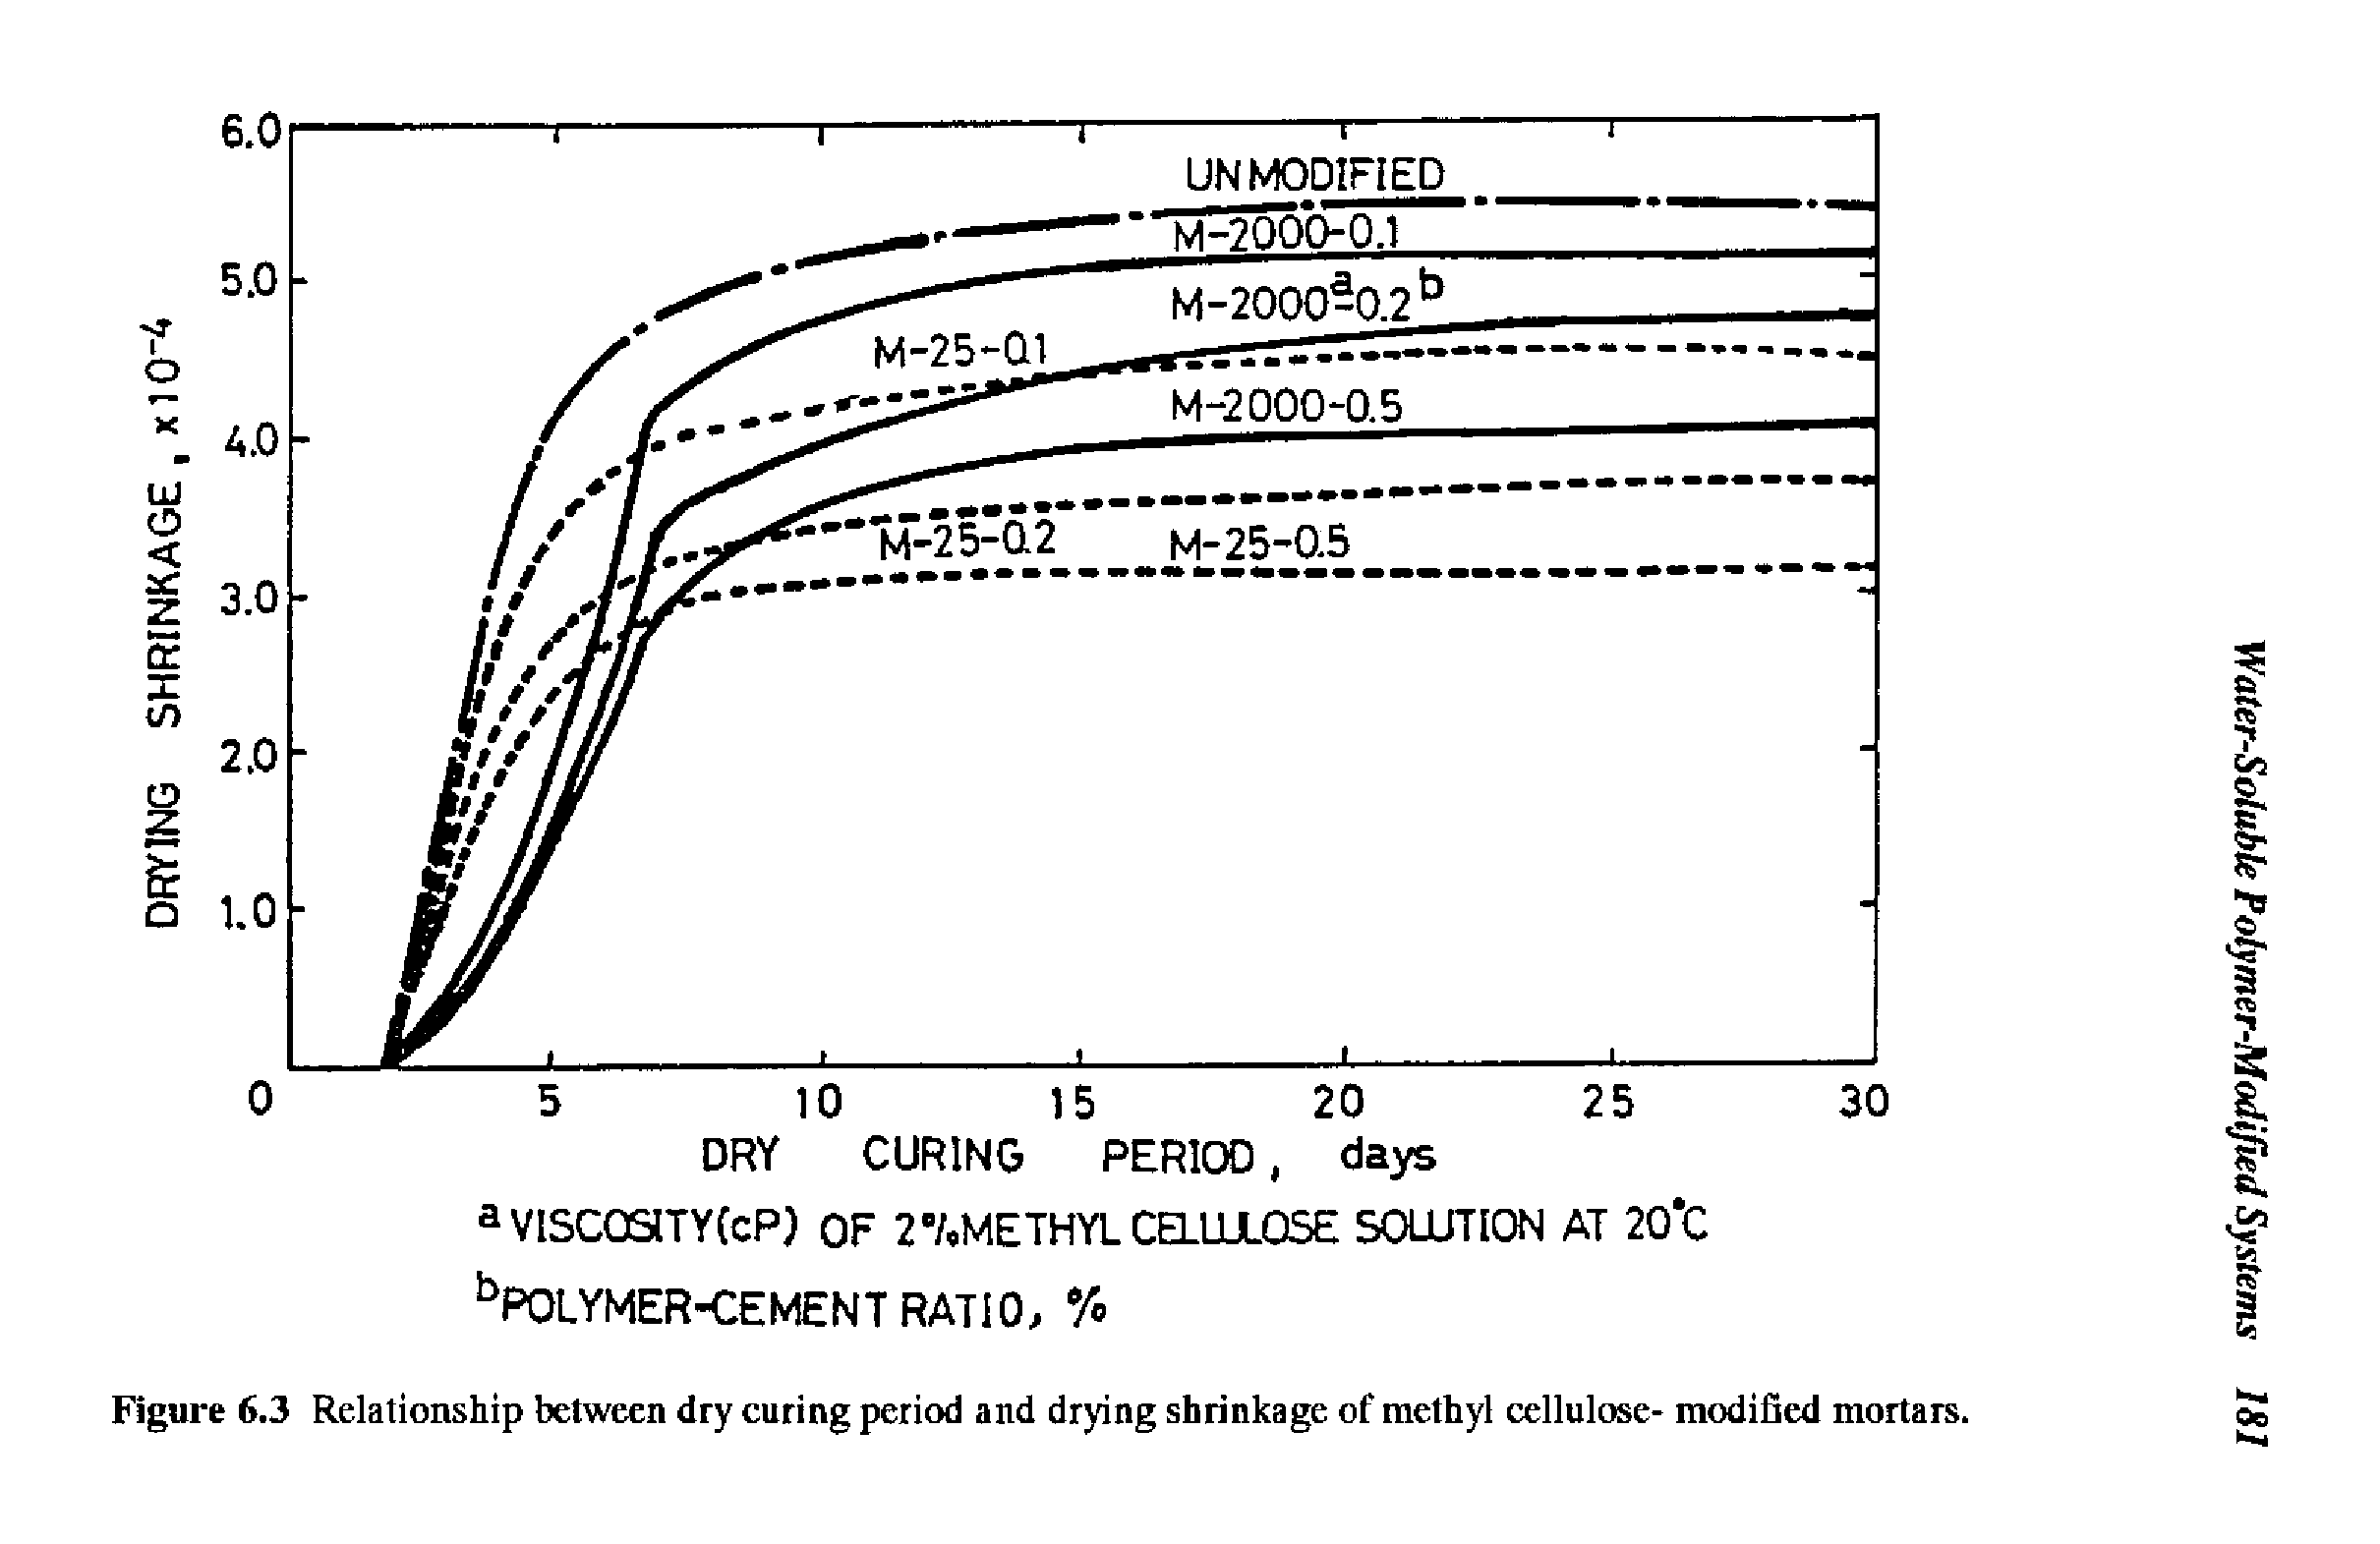 Figure 6.3 Relationship between dry curing period and drying shrinkage of methyl cellulose- modified mortars.